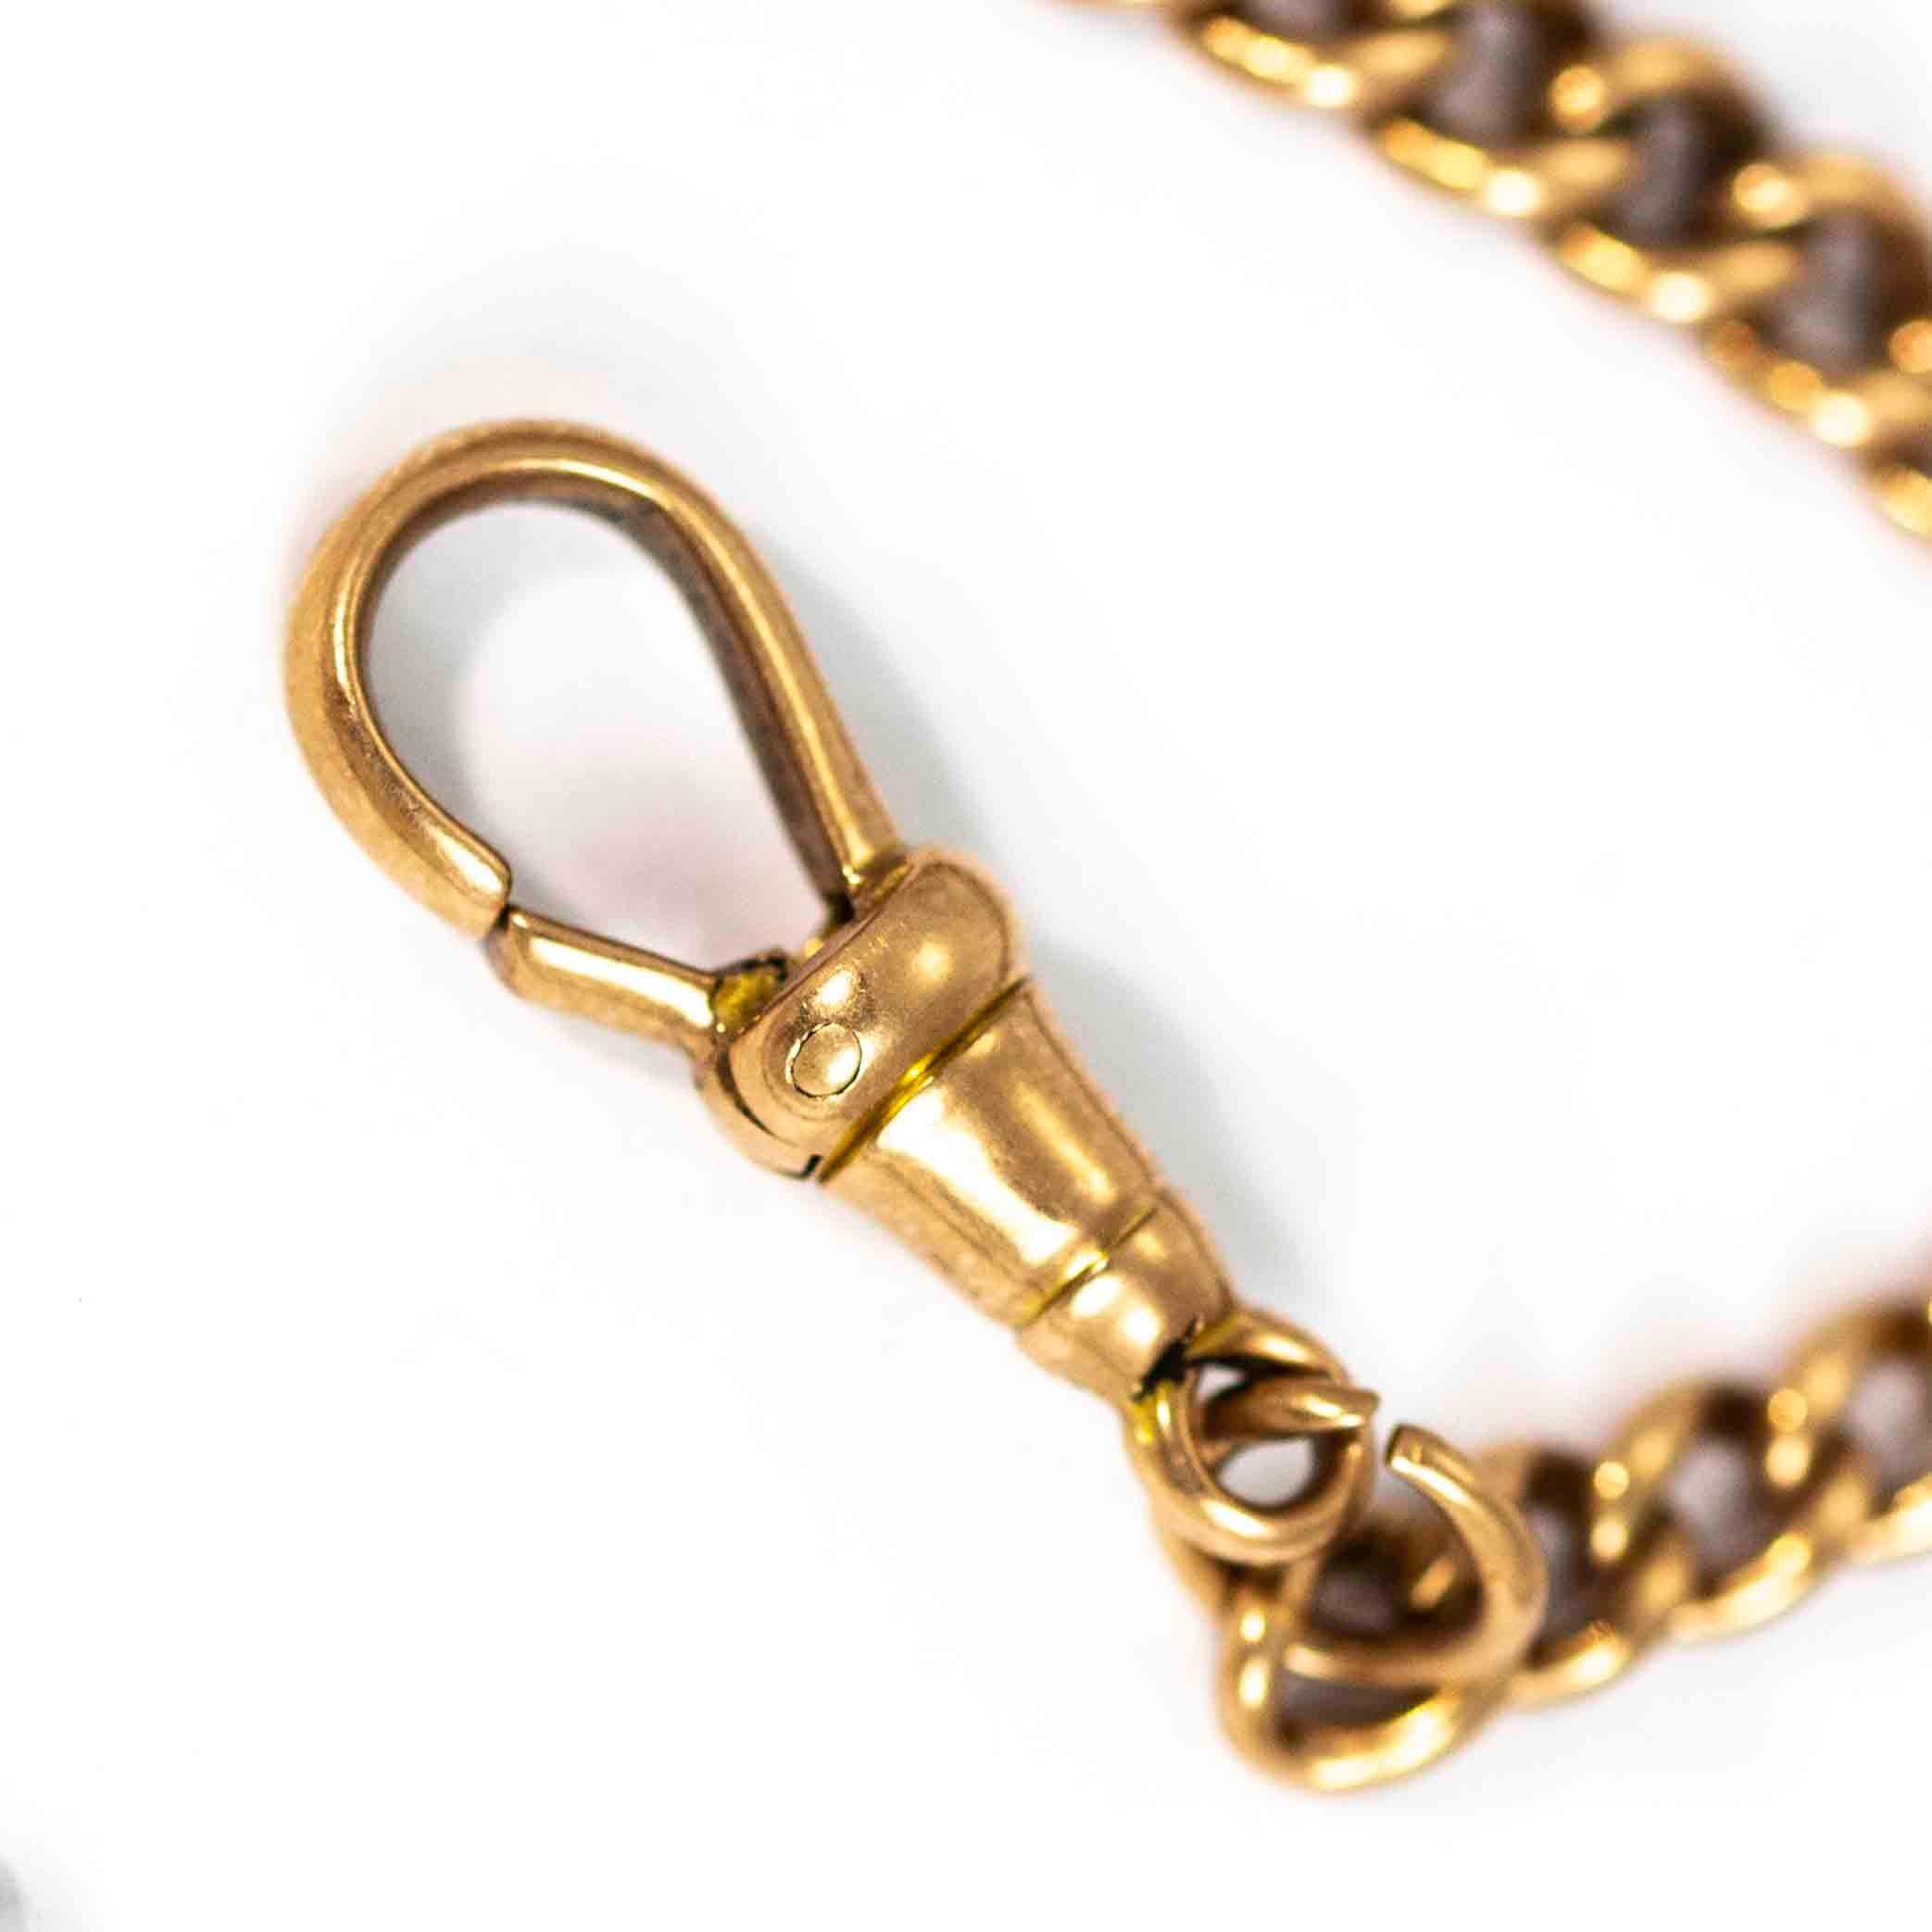 A fine vintage double Albert chain joined with a drop link and ended with a pair of superb dog-clips. Modelled in 9 carat rose gold.

Length: 40cm